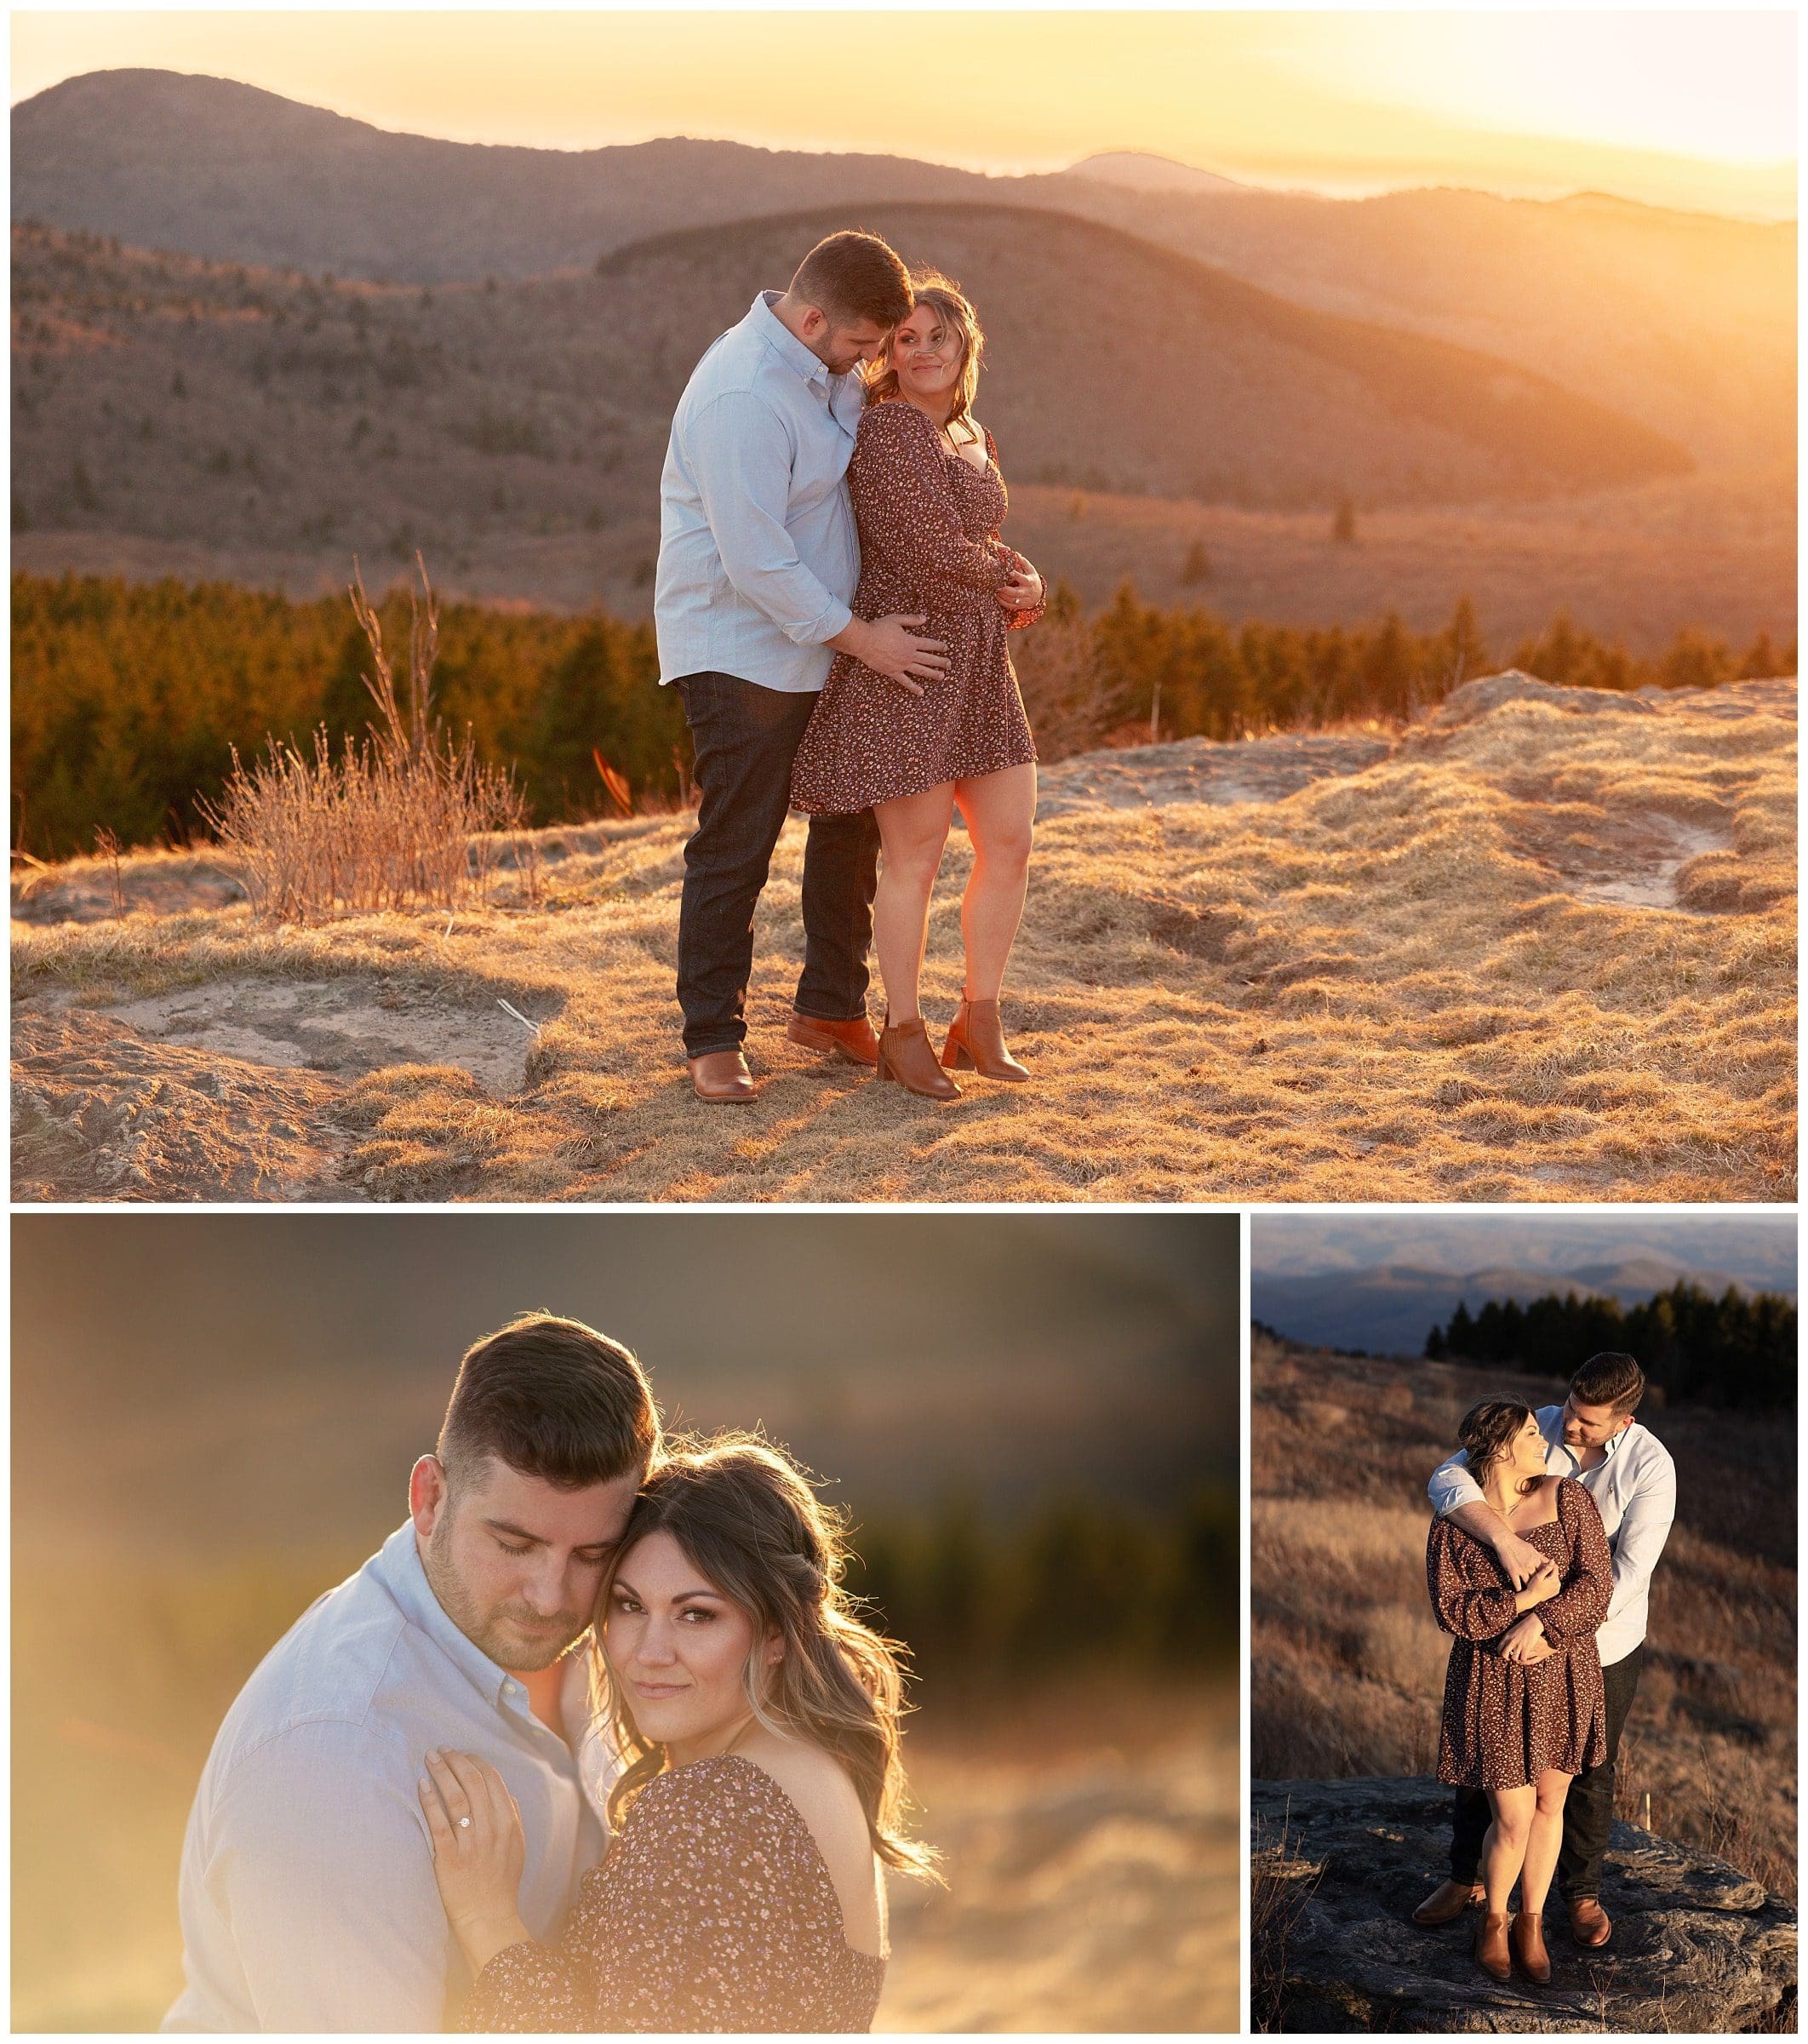 Joyful, fun engagement photos on the mountain top with warm golden light surround the mountain and the couple- photography by Kathy Beaver 